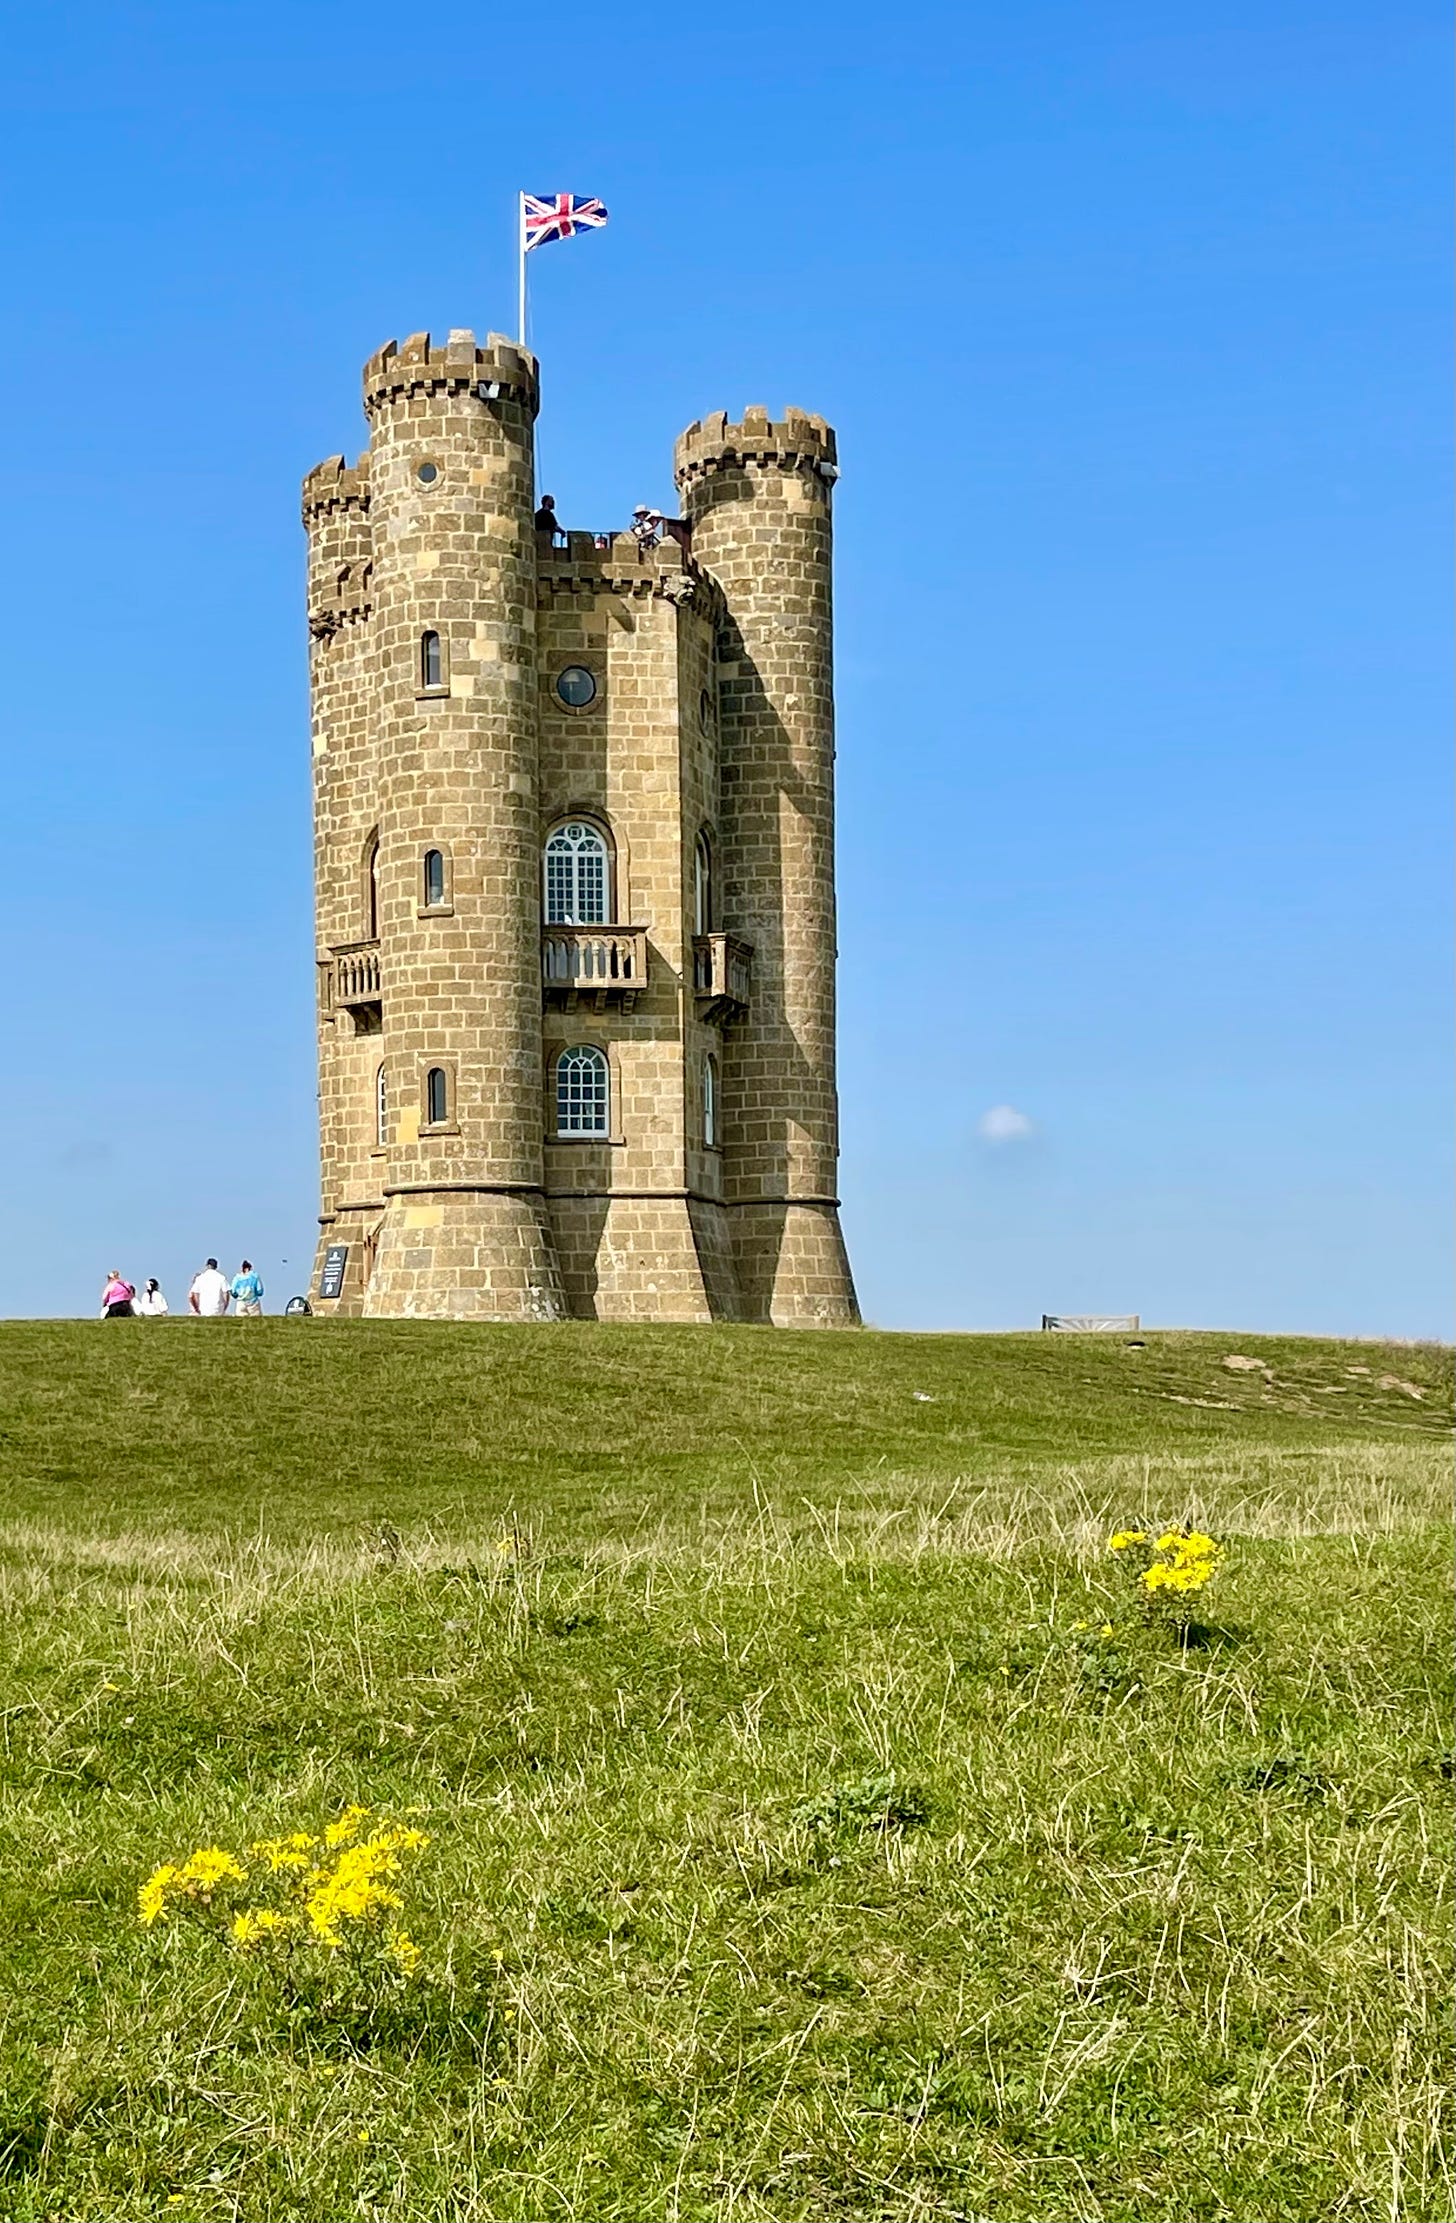 The Broadway Tower on the green grass of Beacon Hill against a bright blue sky in Worcestershire, England